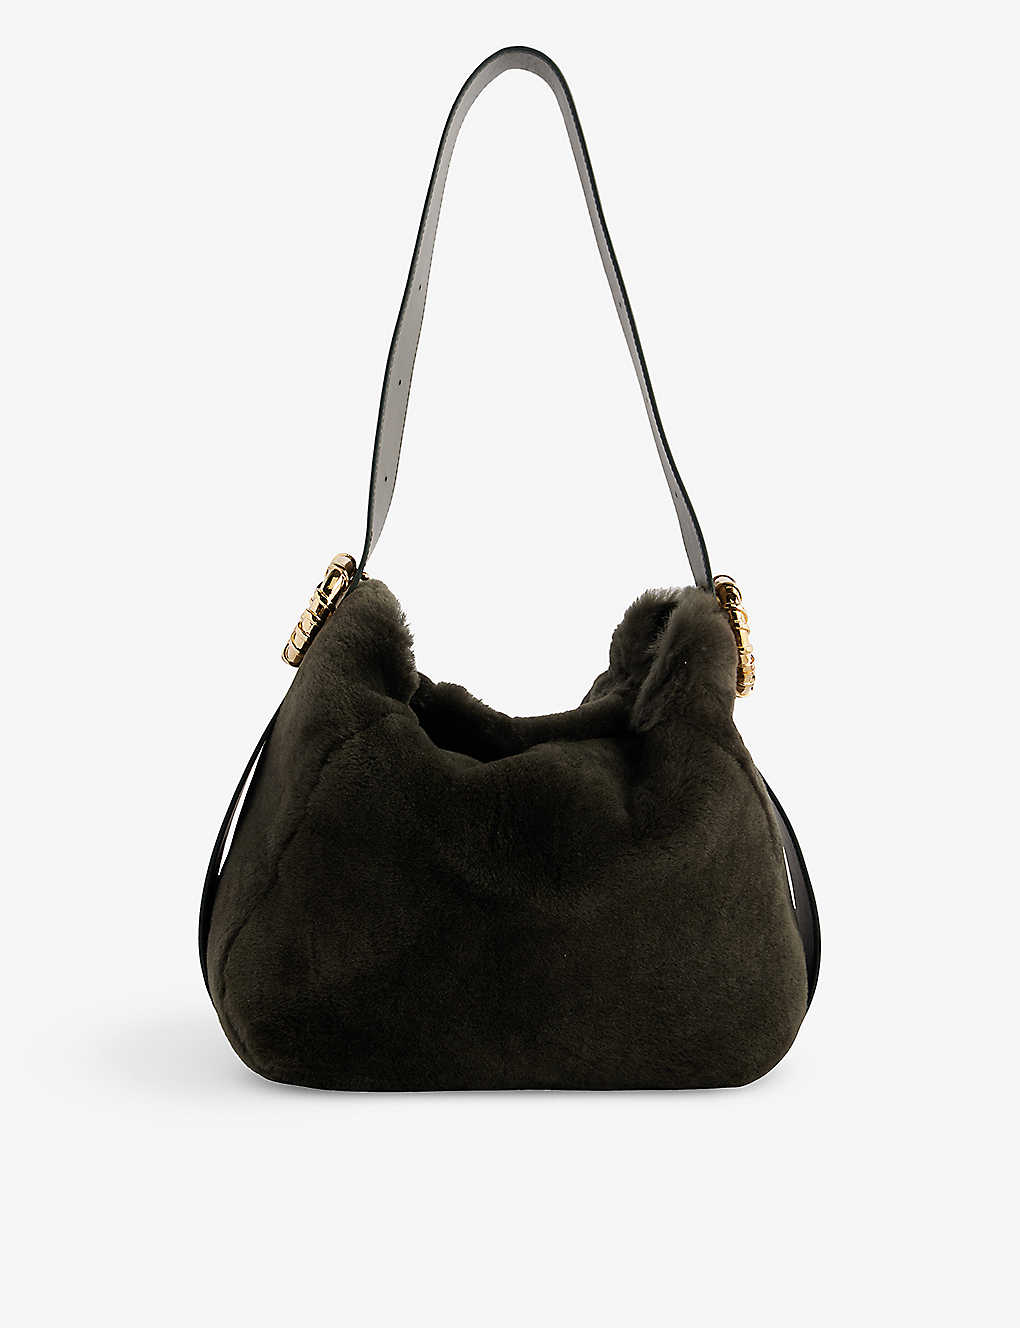 Lanvin Womens Loden Melodie Shearling Leather Hobo Bag